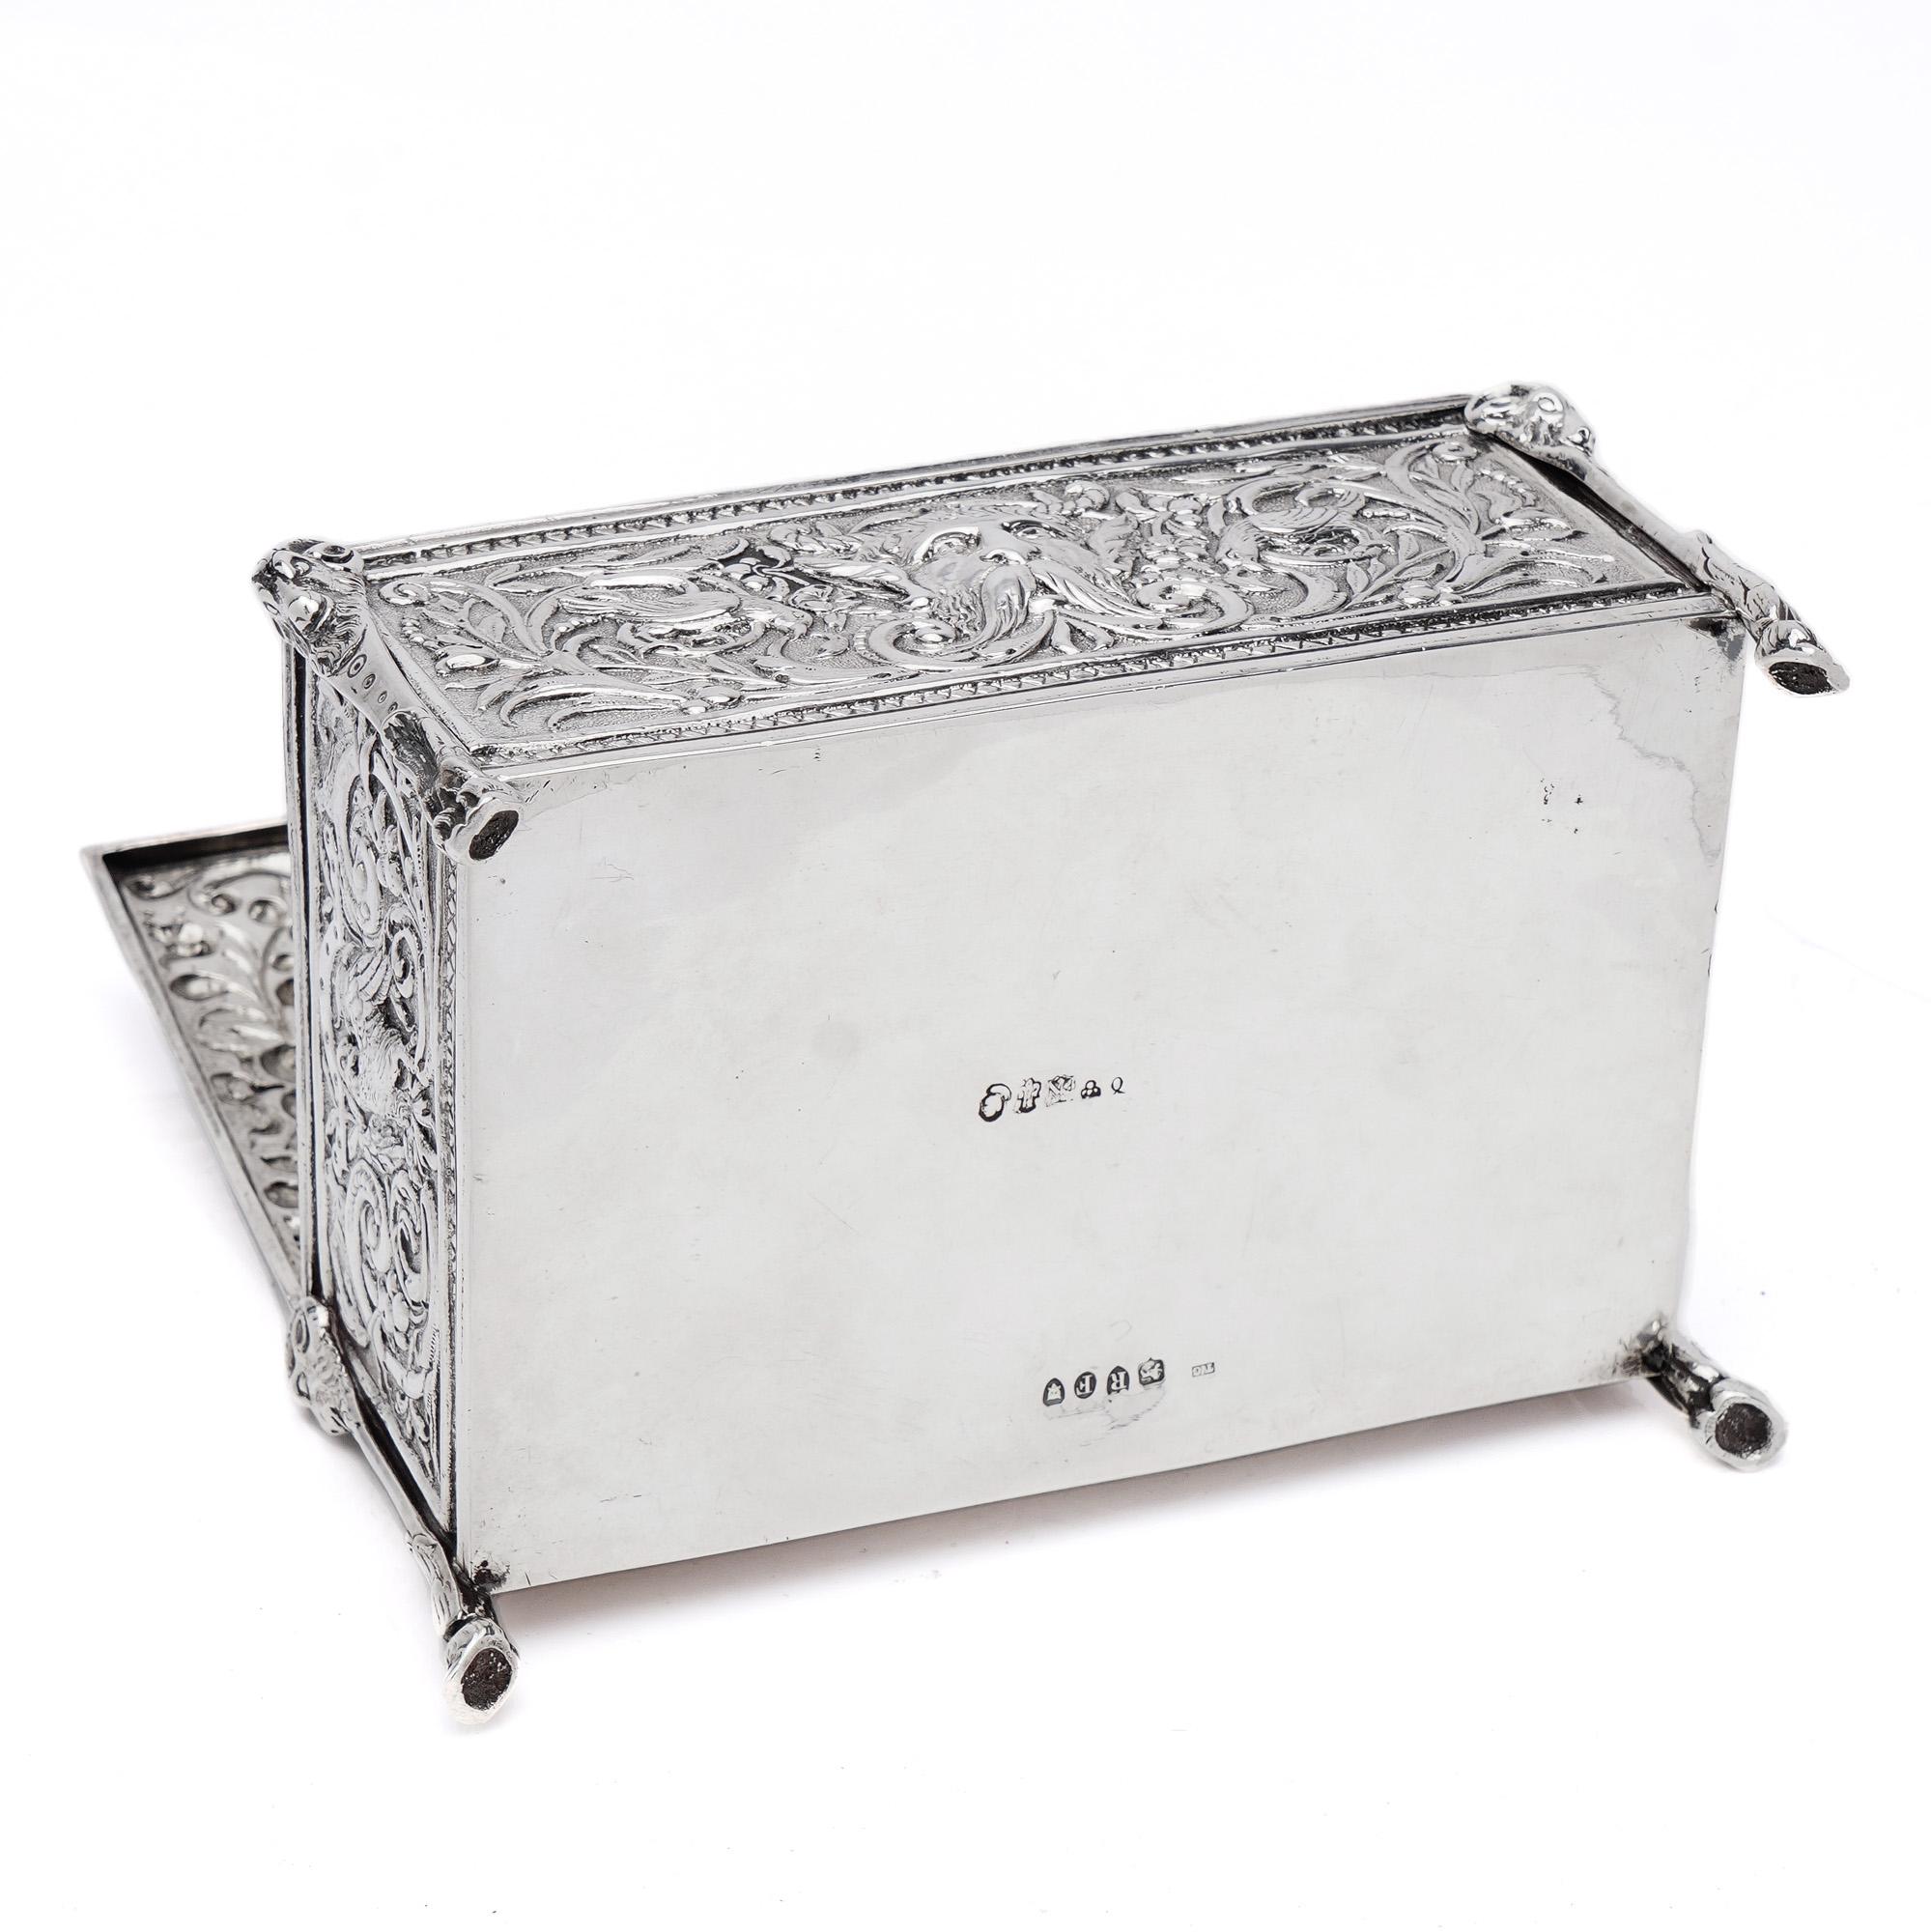 Antique Late 19th Century Silver Repoussé Decorated Jewellery Box with Cherubs In Good Condition For Sale In Braintree, GB